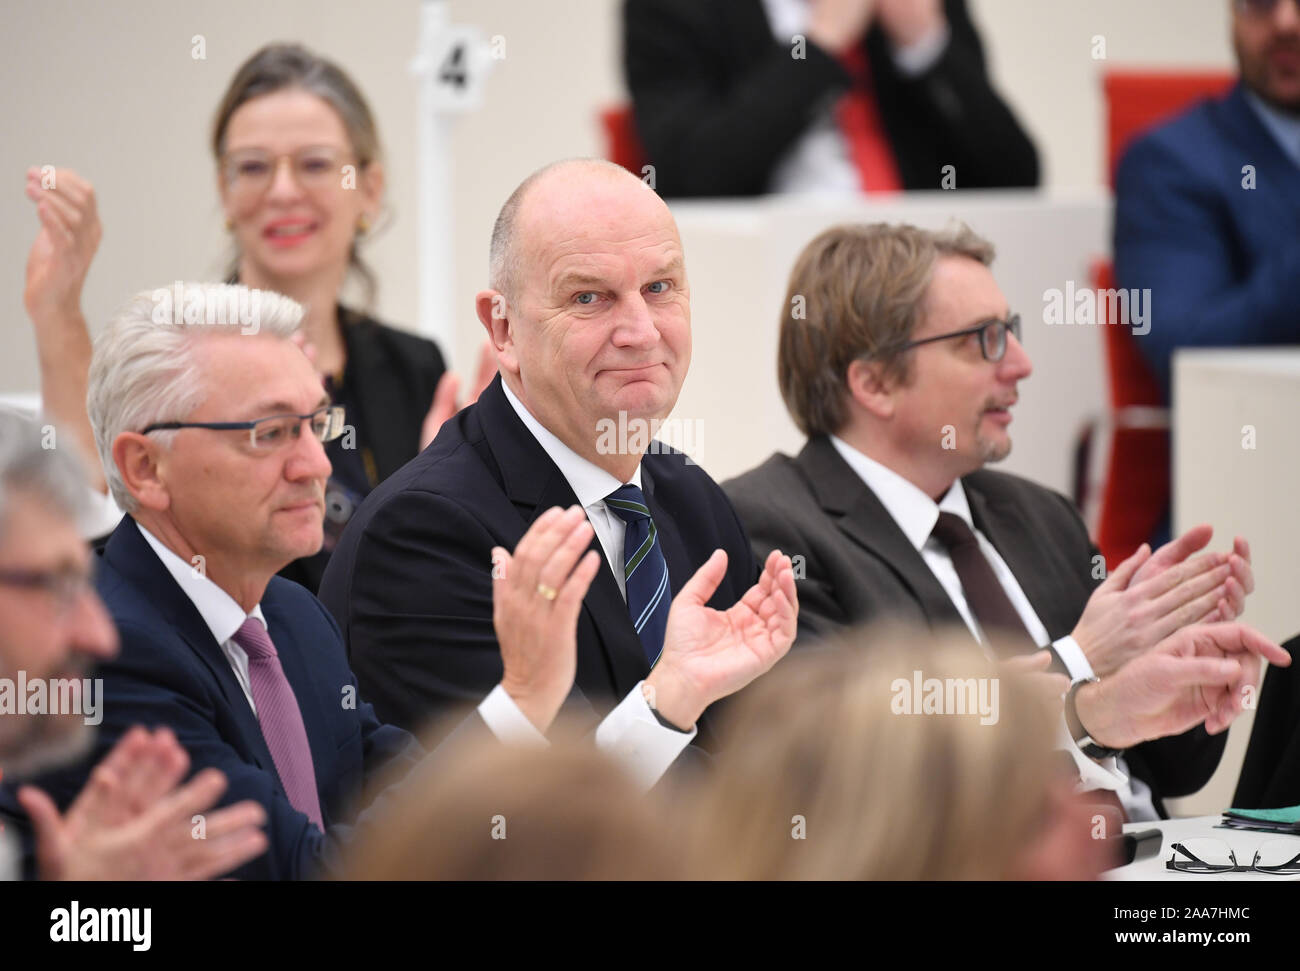 Potsdam, Germany. 20th Nov, 2019. Dietmar Woidke (M), acting prime minister and SPD chairman in Brandenburg, sits next to Mike Bischoff (l), outgoing SPD faction leader, and Björn Lüttmann (r), parliamentary SPD managing director during the state parliament session. Credit: Monika Skolimowska/dpa-Zentralbild/dpa/Alamy Live News Stock Photo